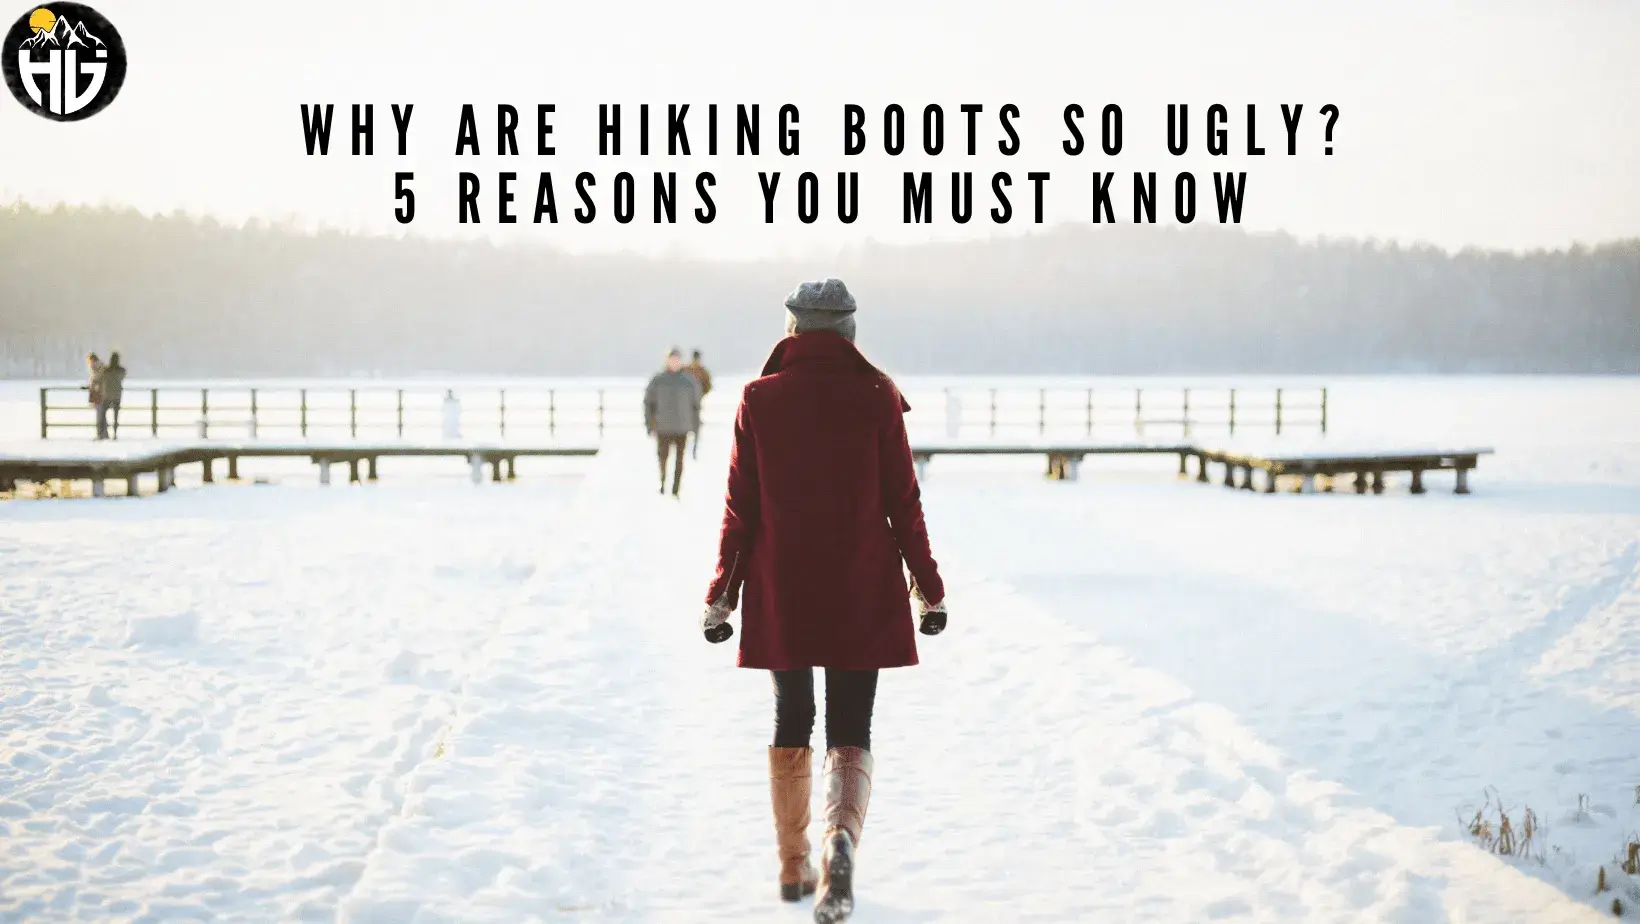 Why Are Hiking Boots so Ugly? 5 Reasons You Must Know